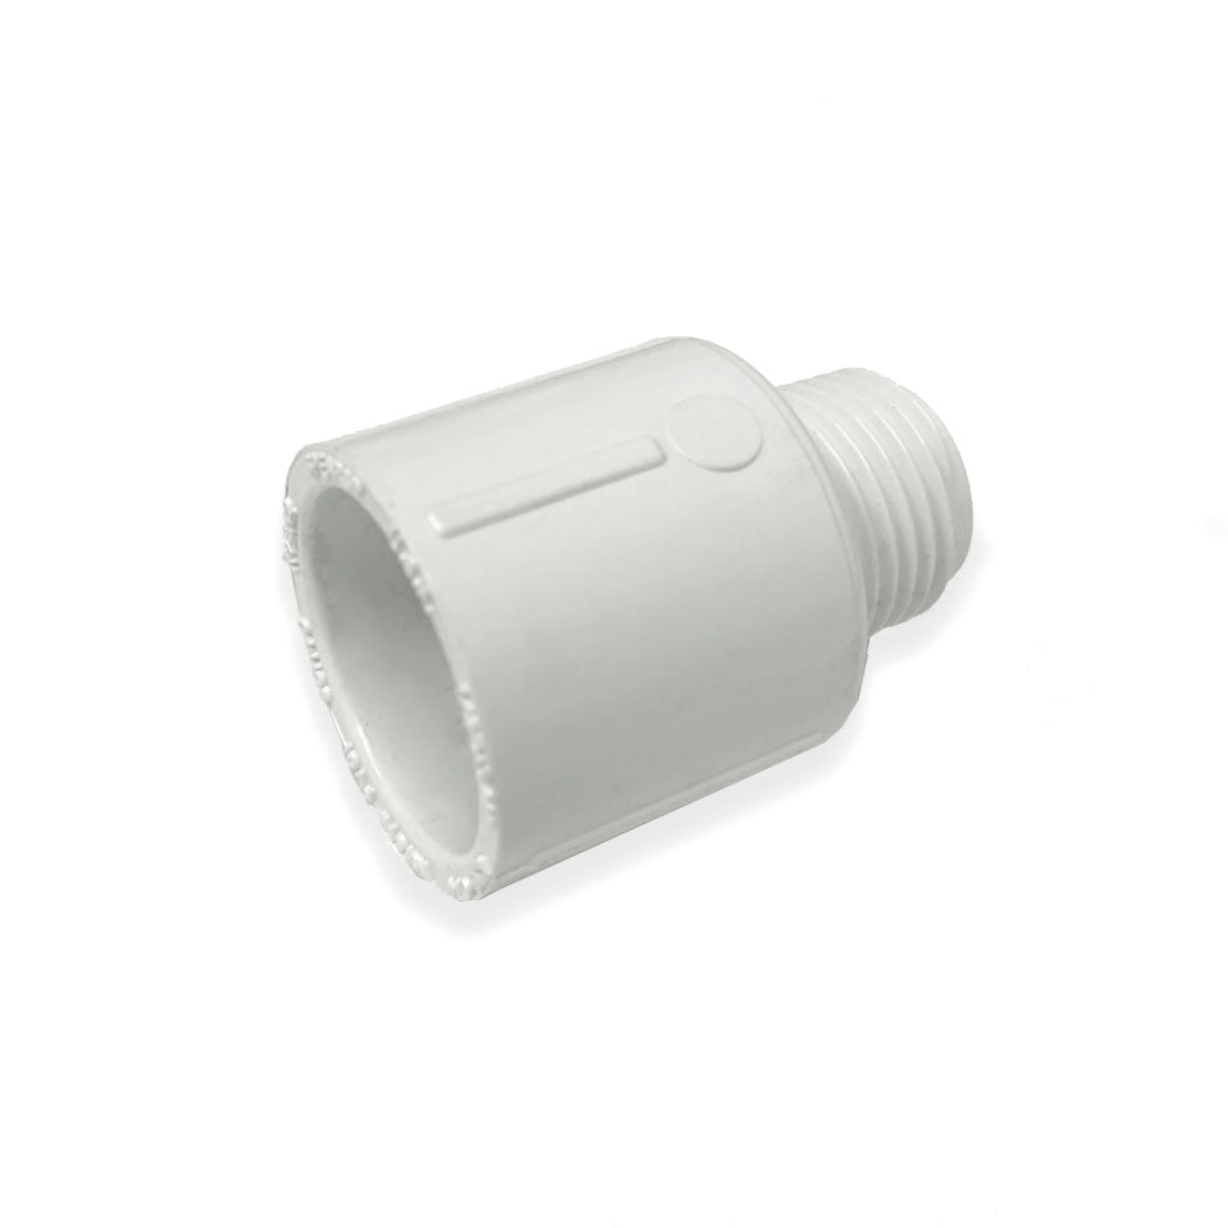 1/2-inch male to 3/4" female connector